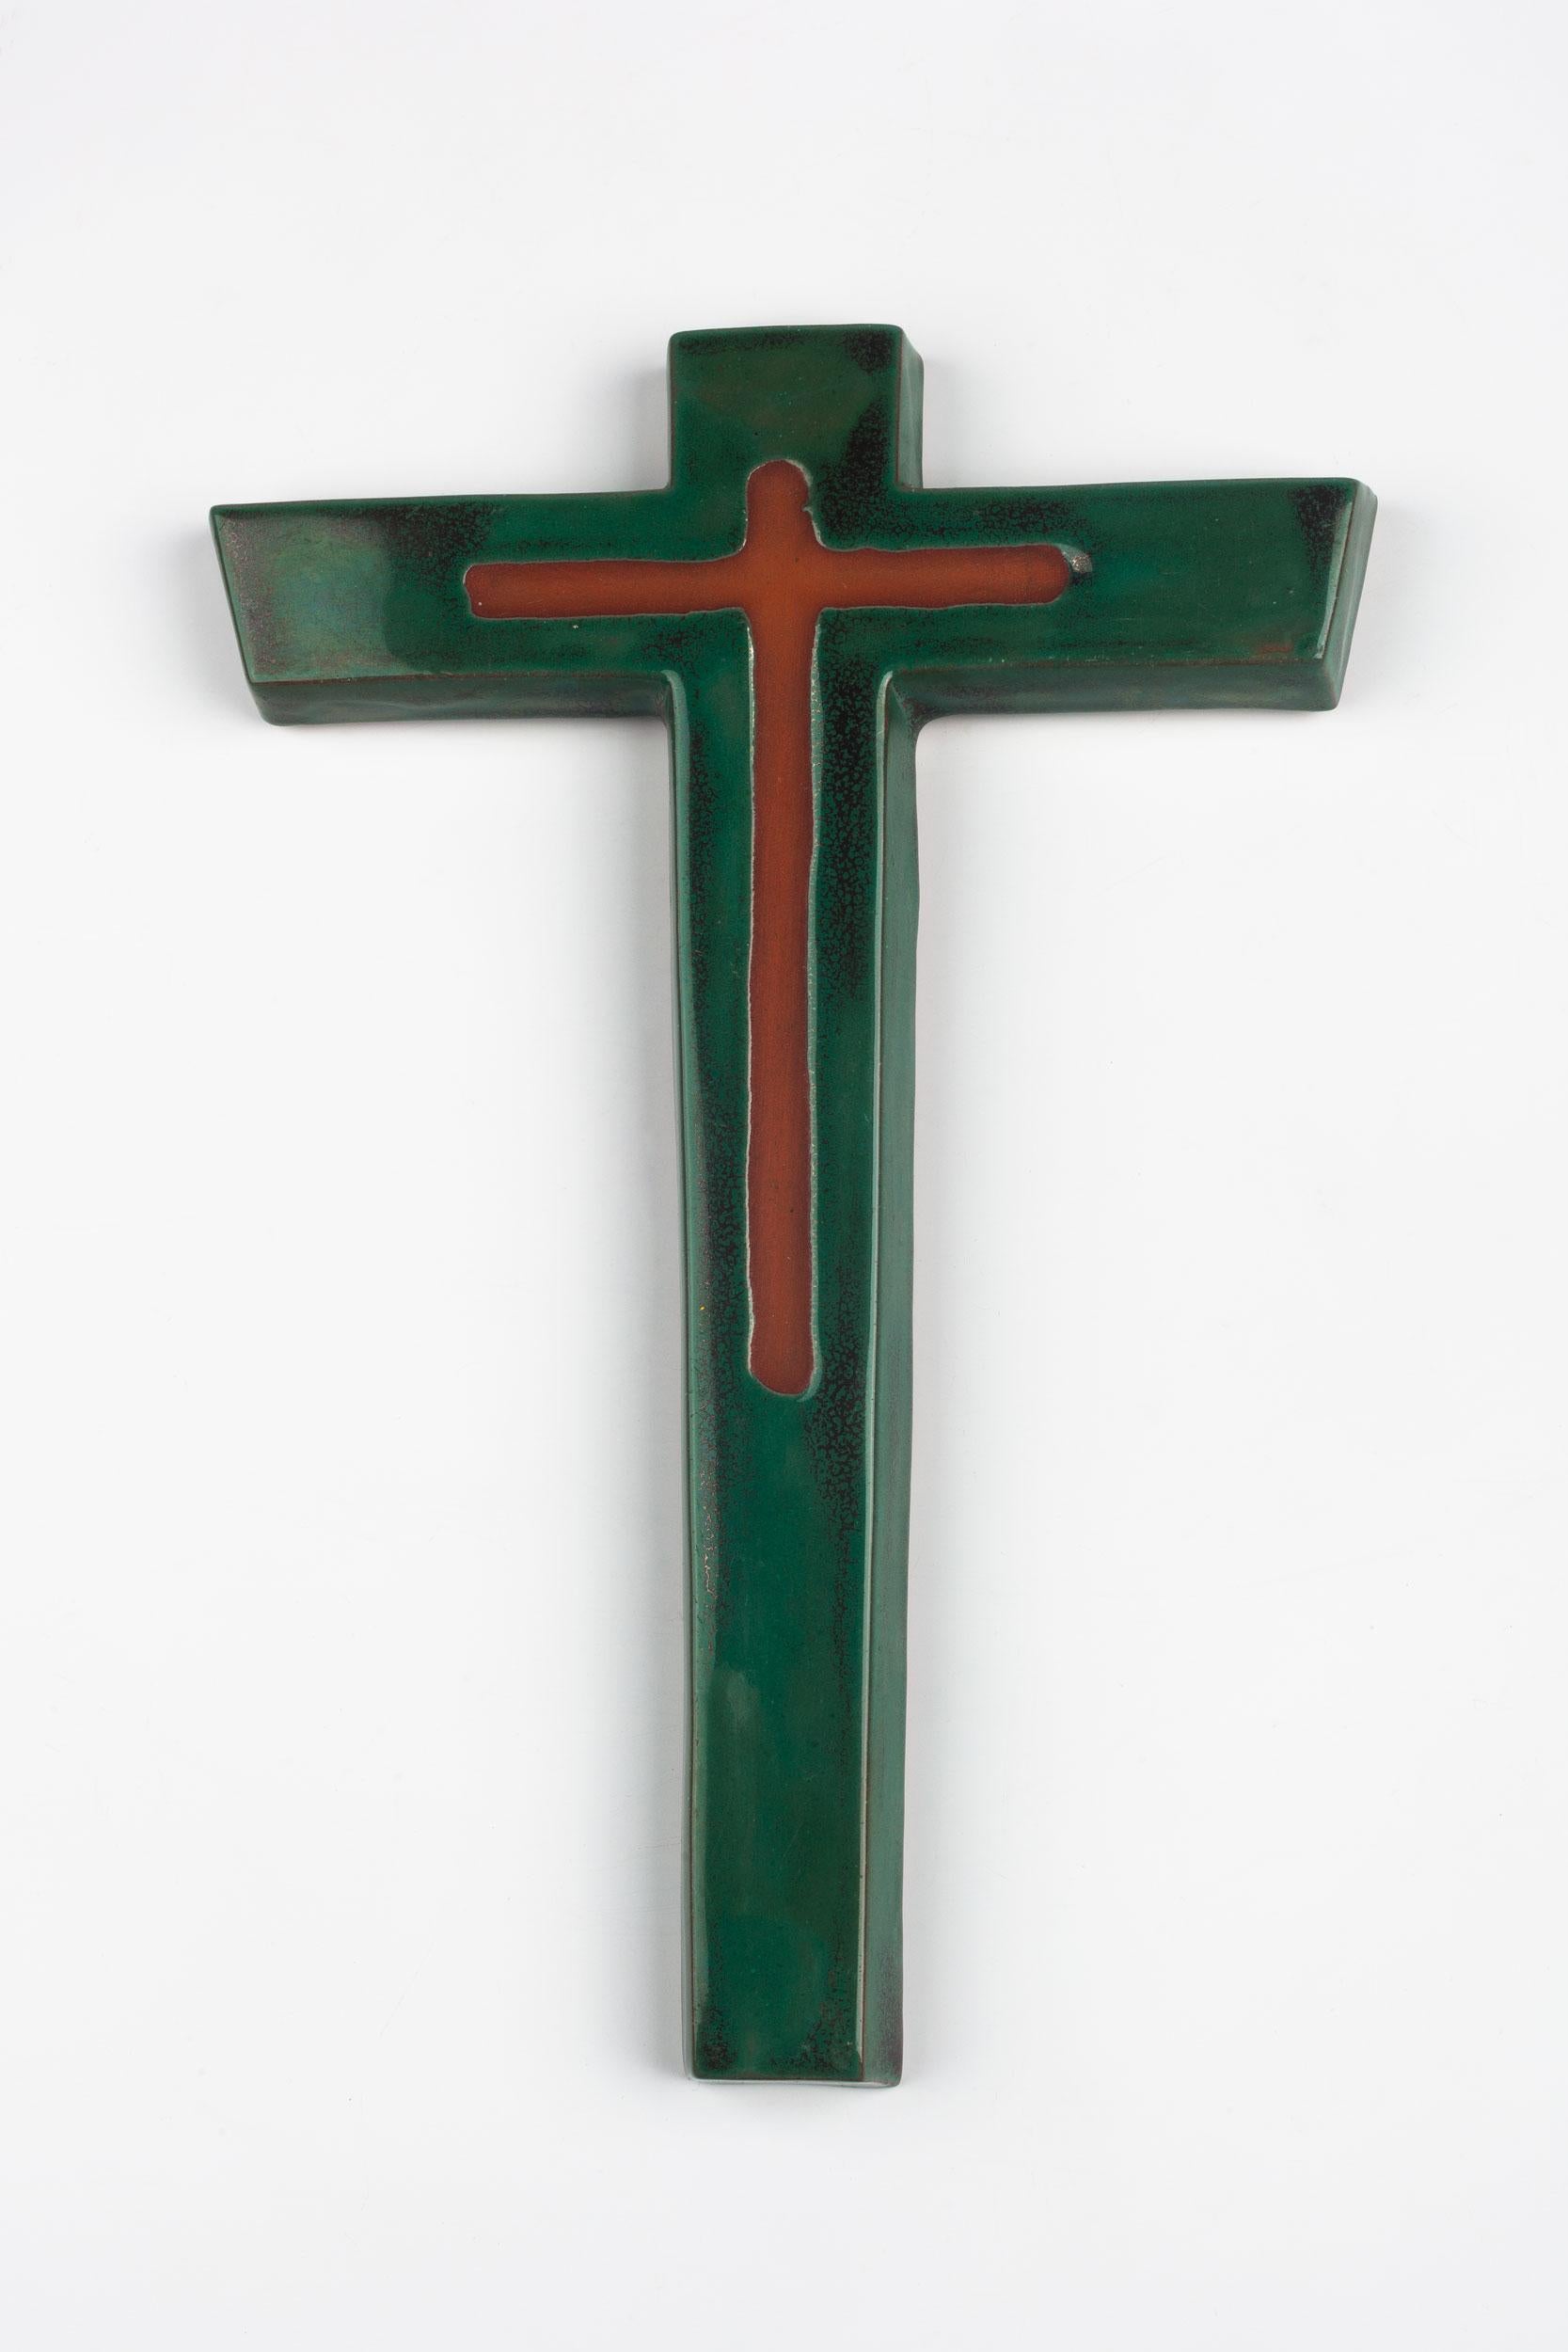 Midcentury European ceramic wall cross in matte brown and glazed green. From a large collection of crosses handmade by Flemish artisans.

From modernism to brutalism, the crosses in our collection range from being as futurist as a modernist church